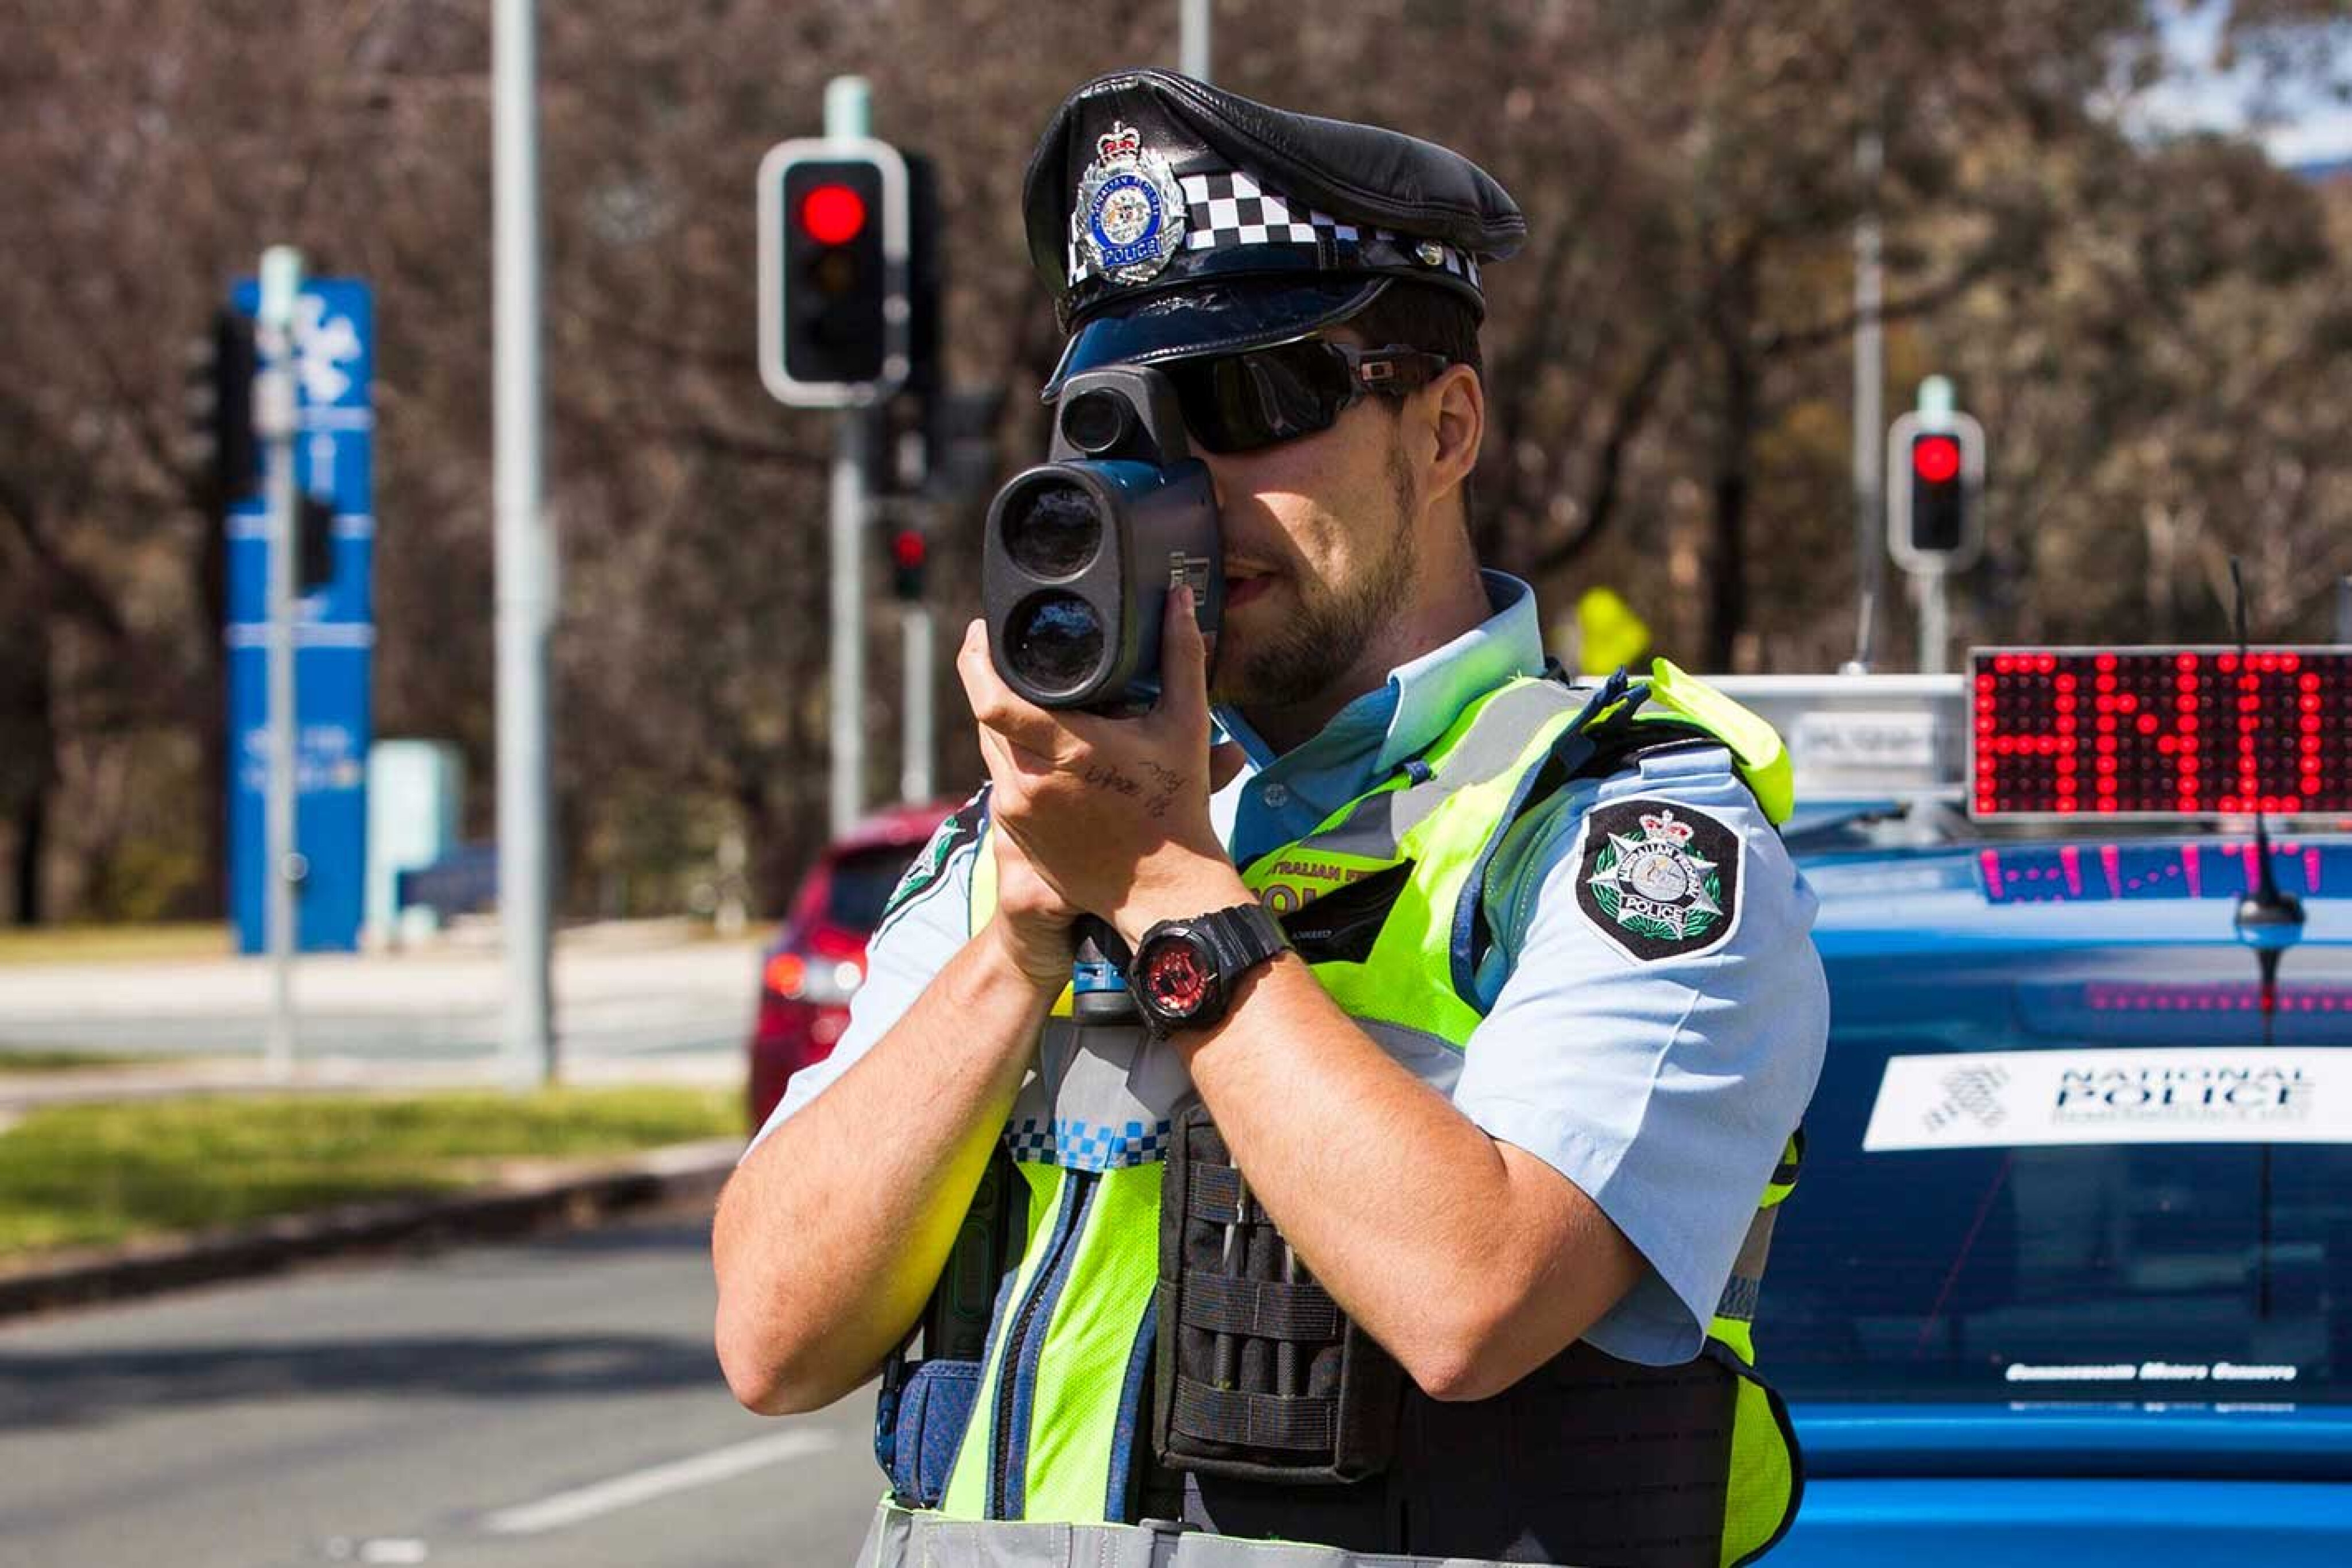 b9e0099c/south australian police out 125 speeding fines complex legal issues jpg